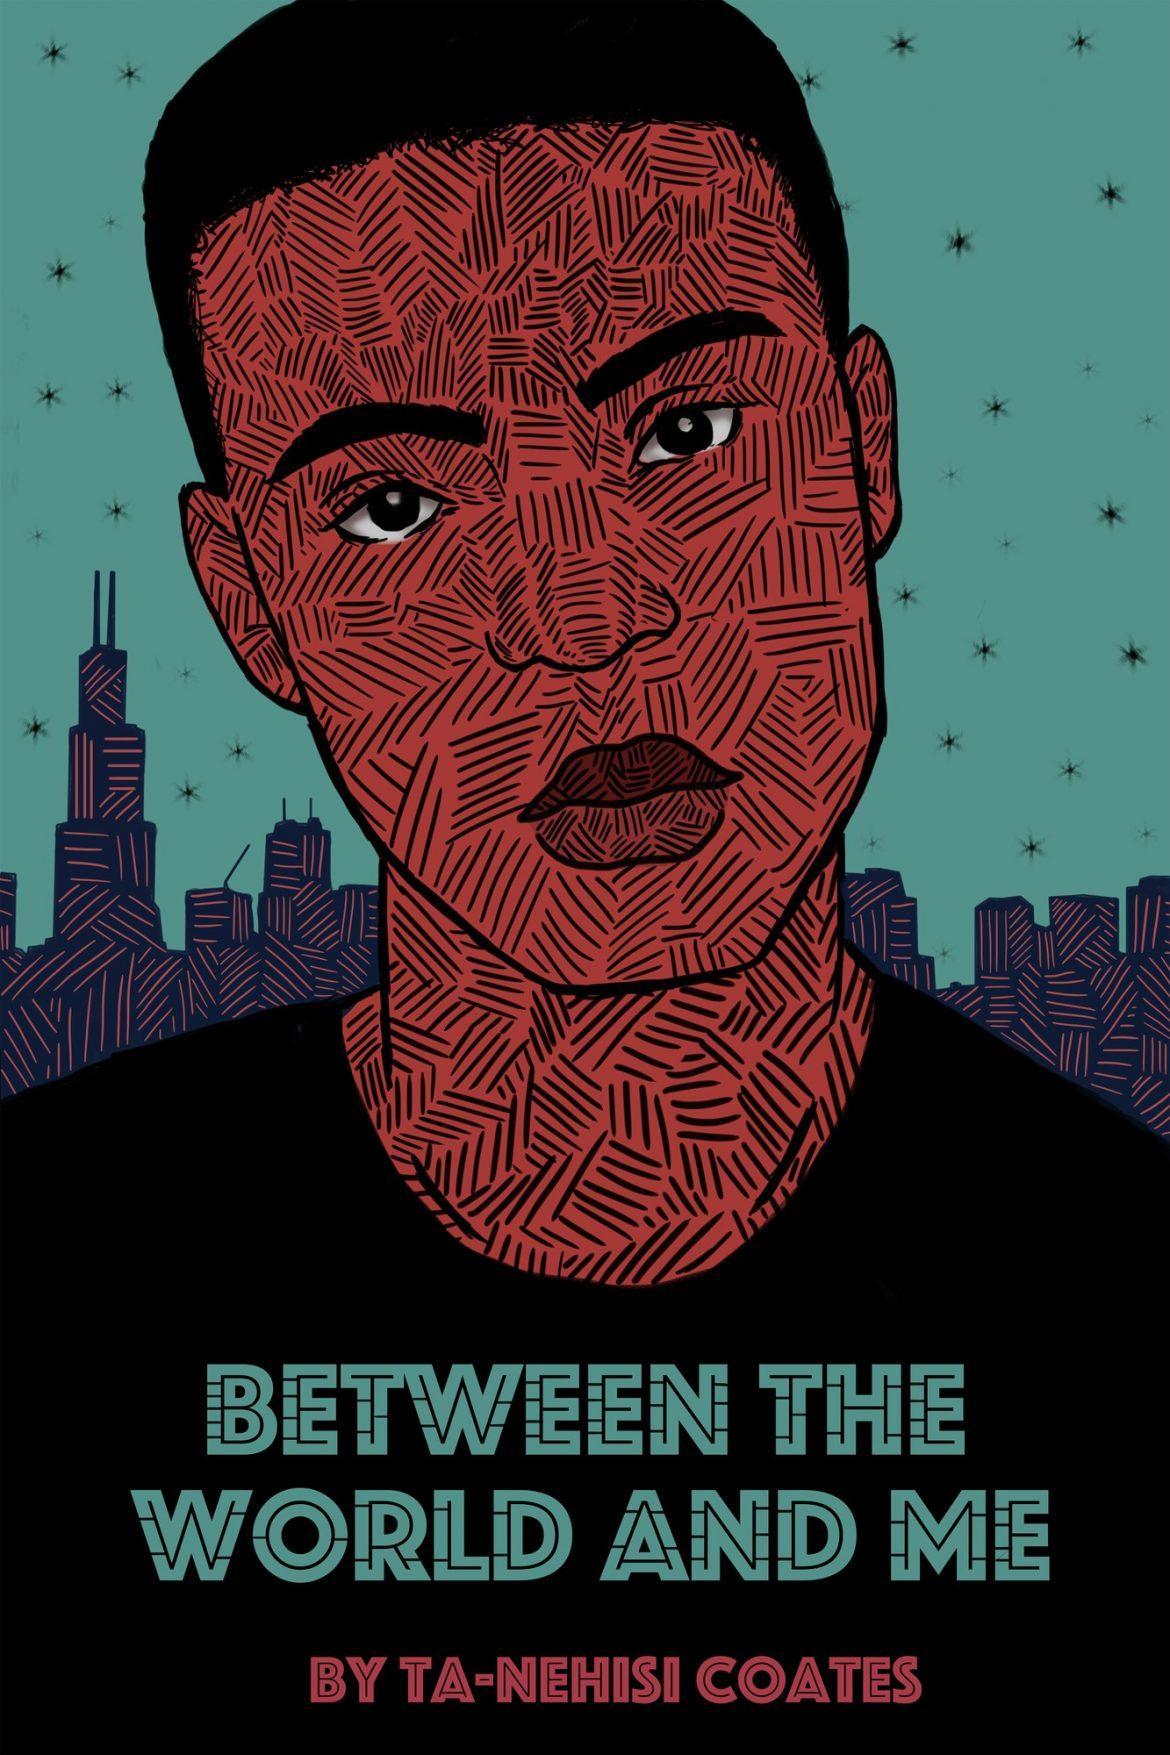 Illustration+shows+a+man+wearing+a+black+shirt+and+the+words%2C+Between+the+world+and+me+by+Ta-Nehisi+Coates